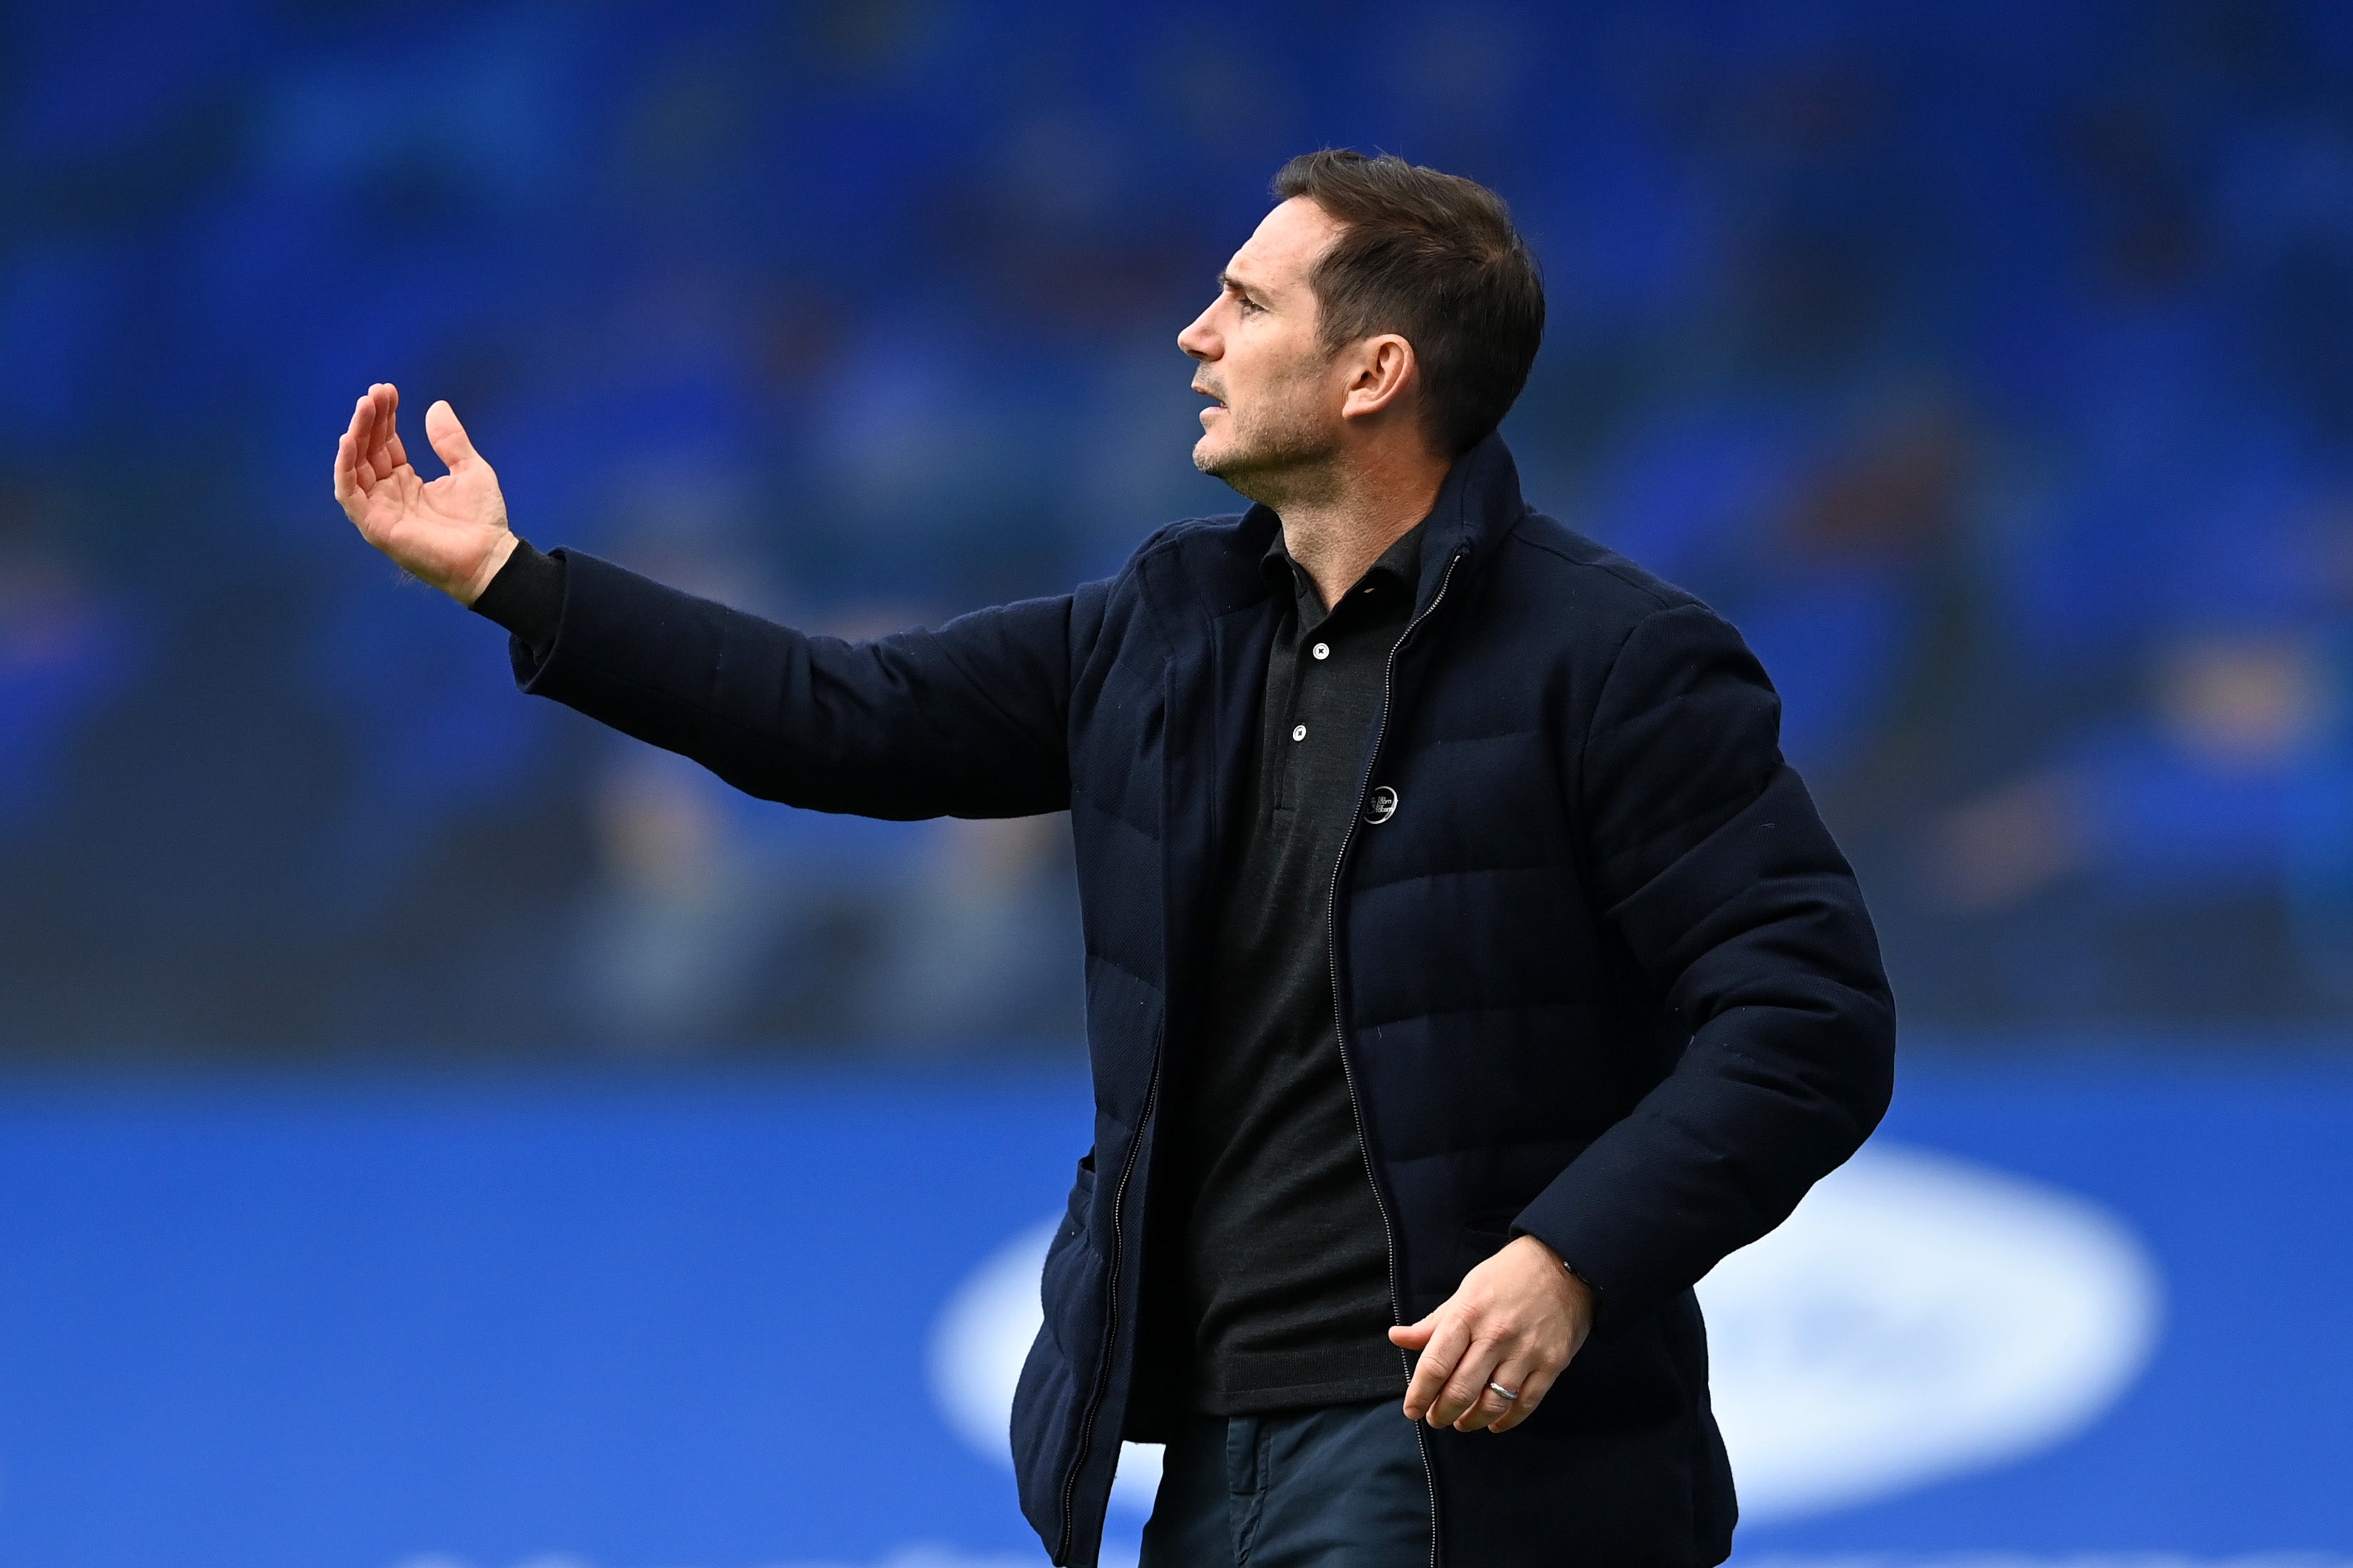 Frank Lampard gestures from the touchline at Stamford Bridge